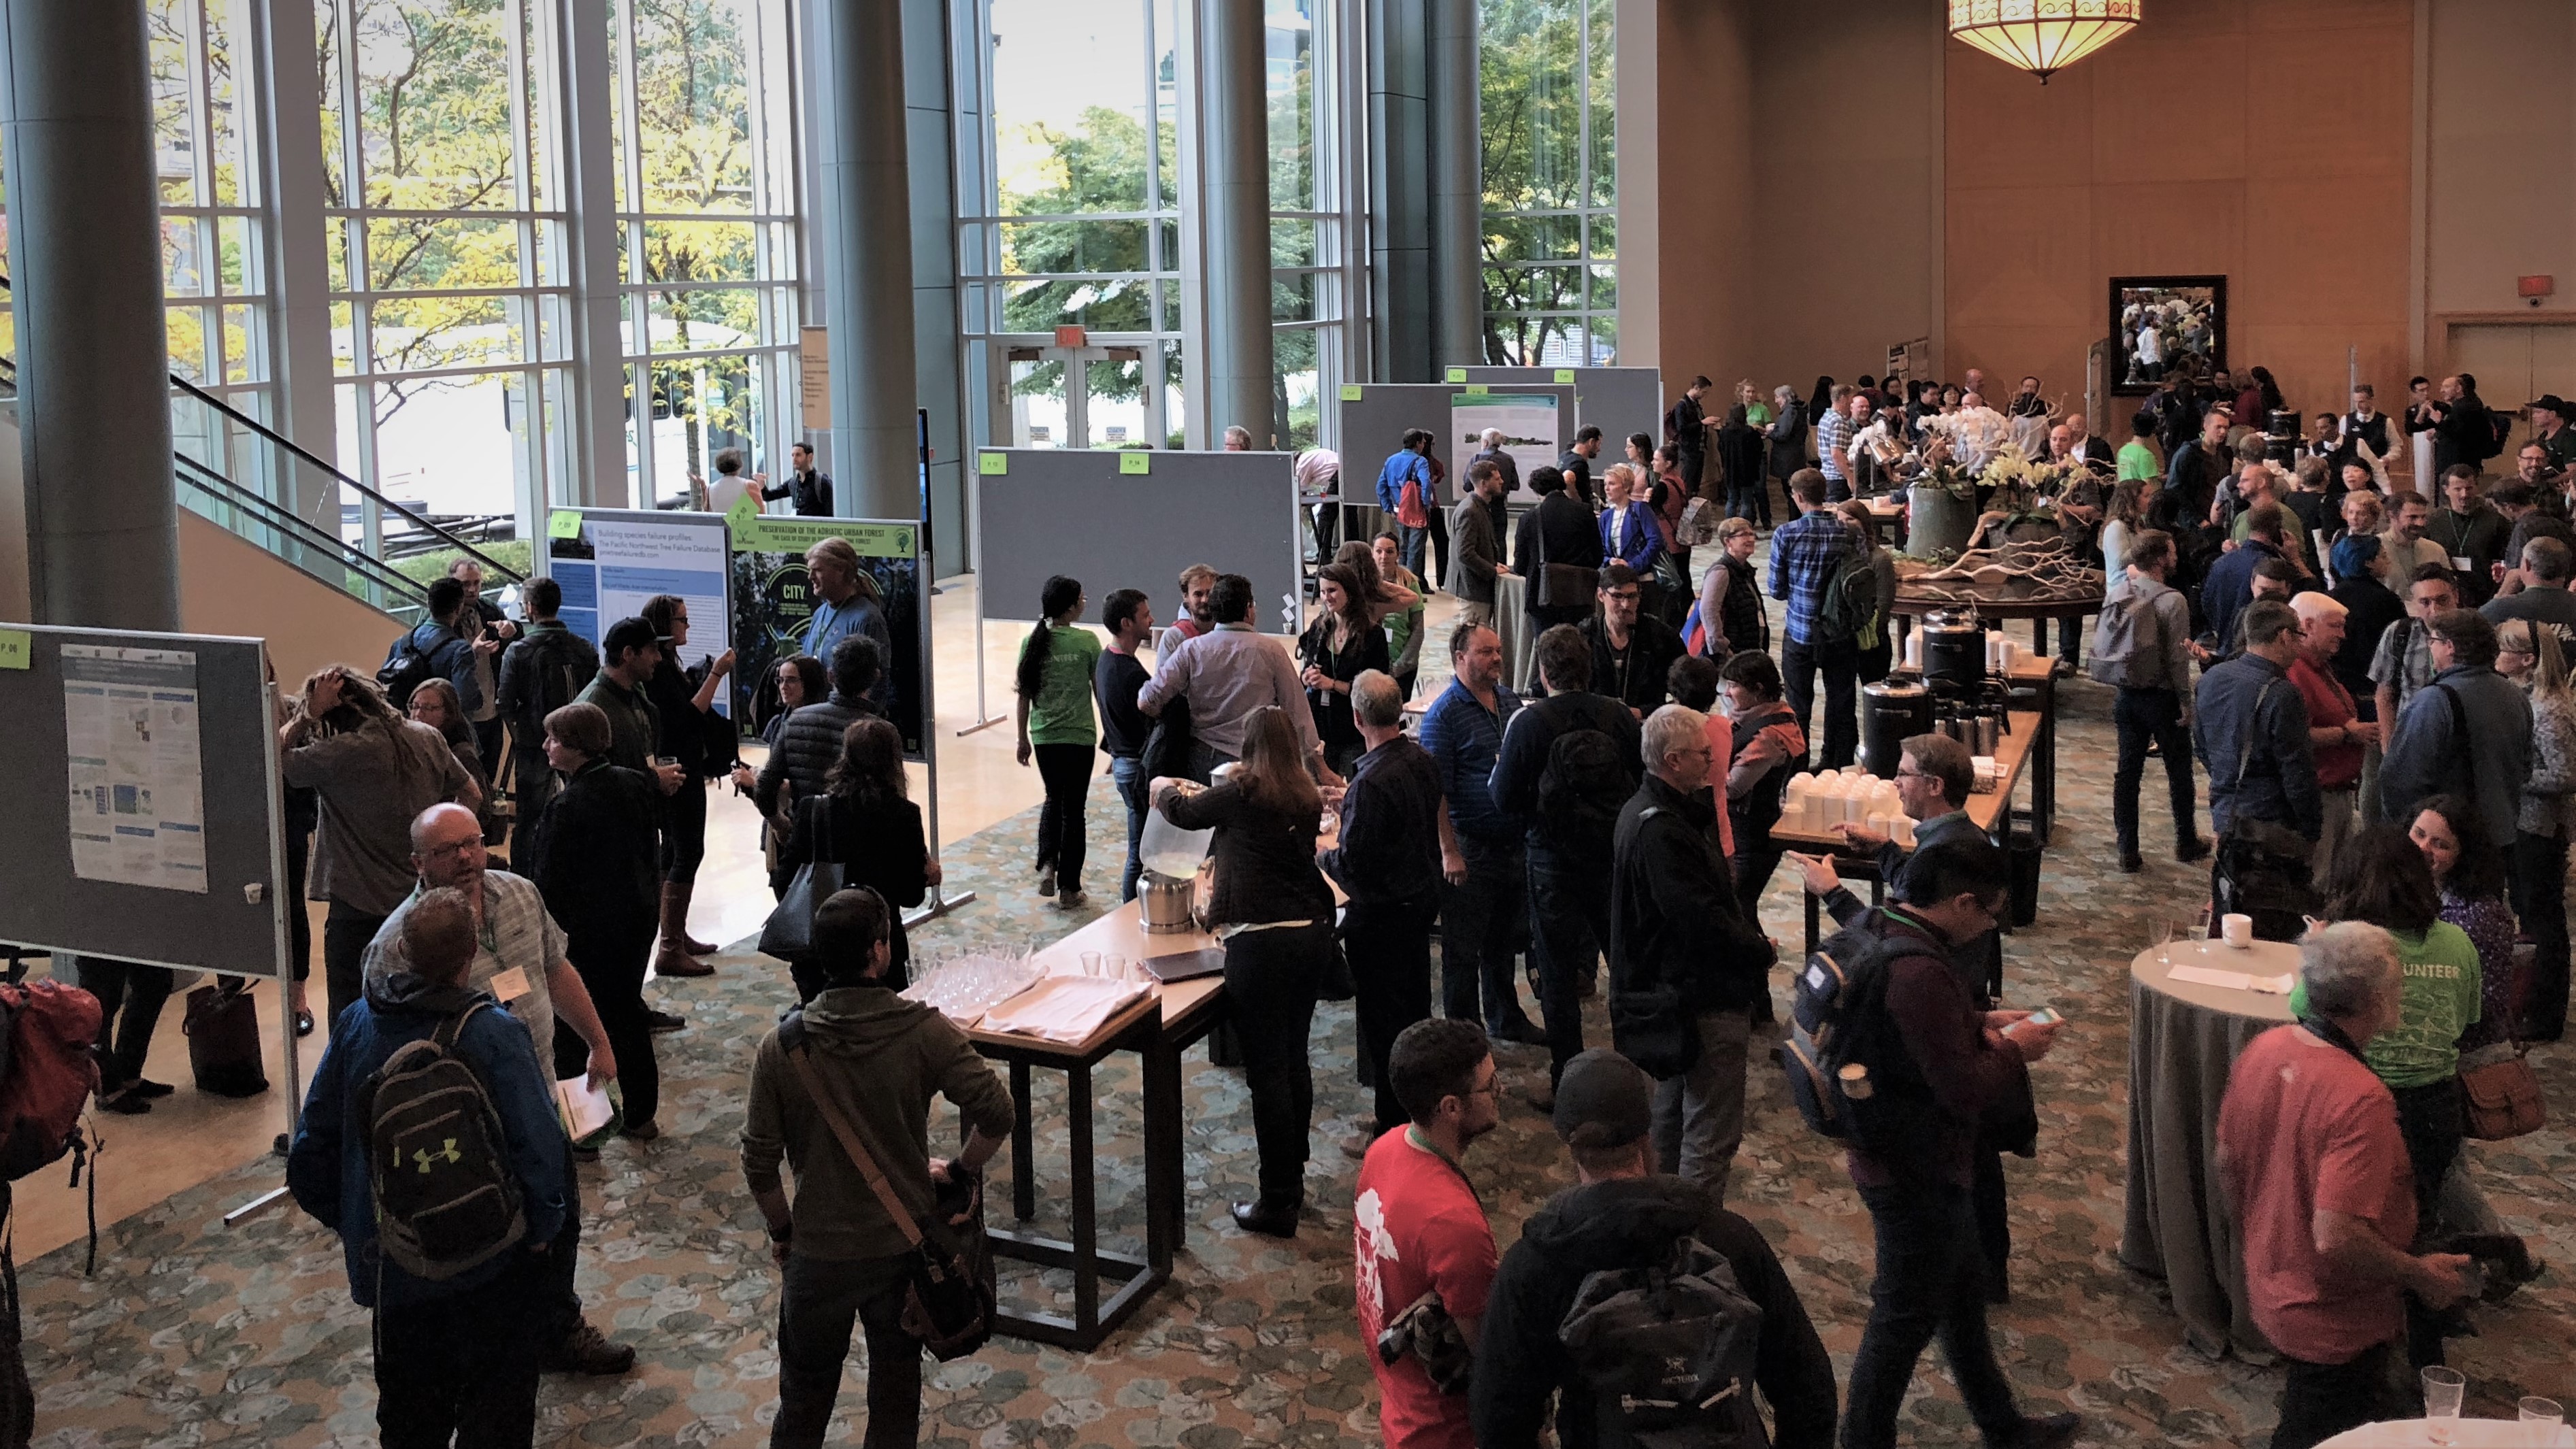 People networking at a conference.